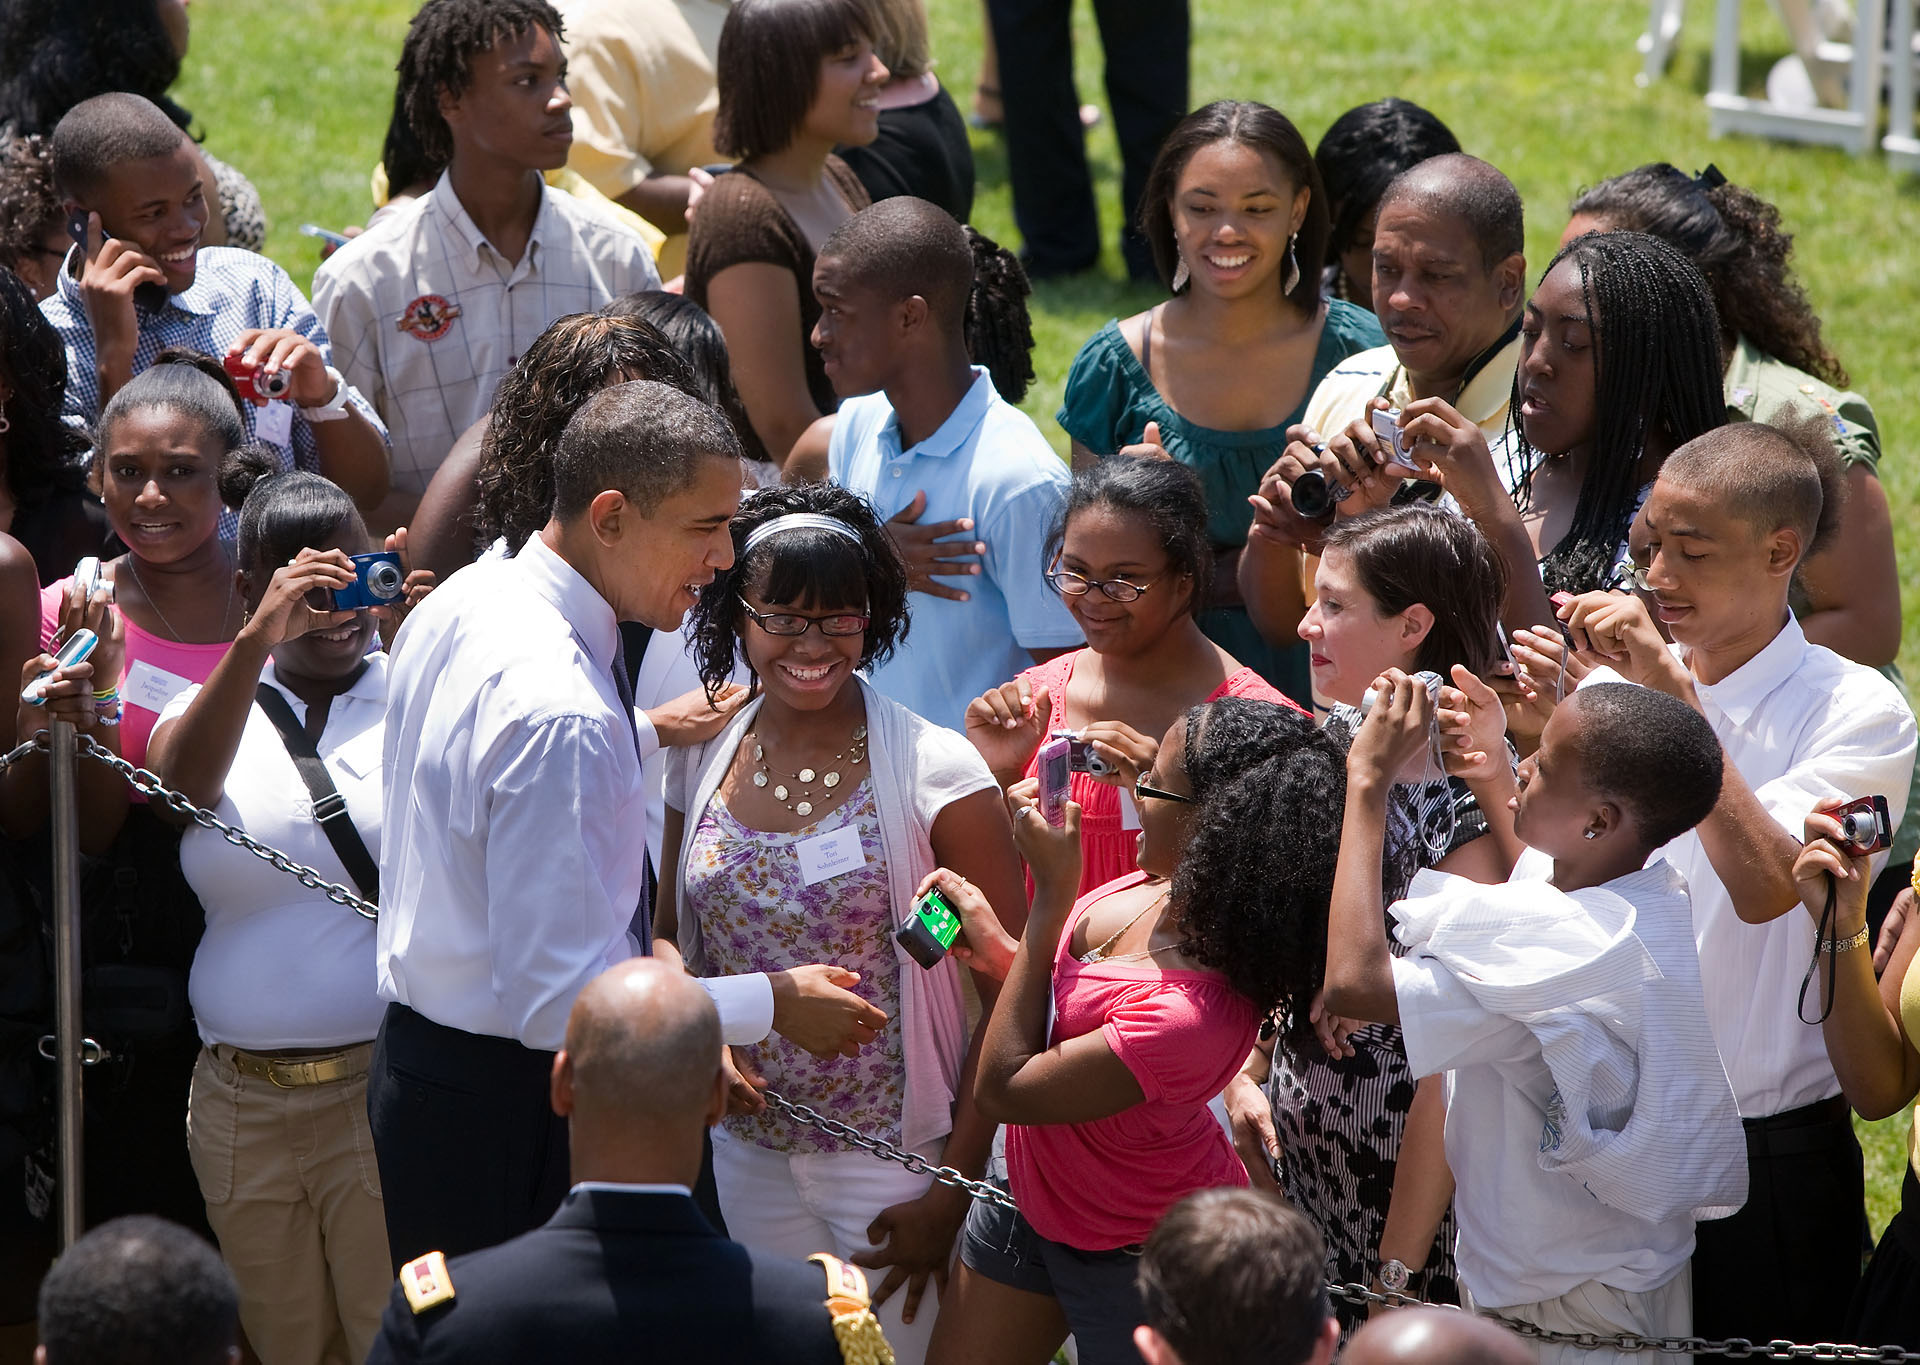 President Obama Greets Kids at Fatherood Barbecue